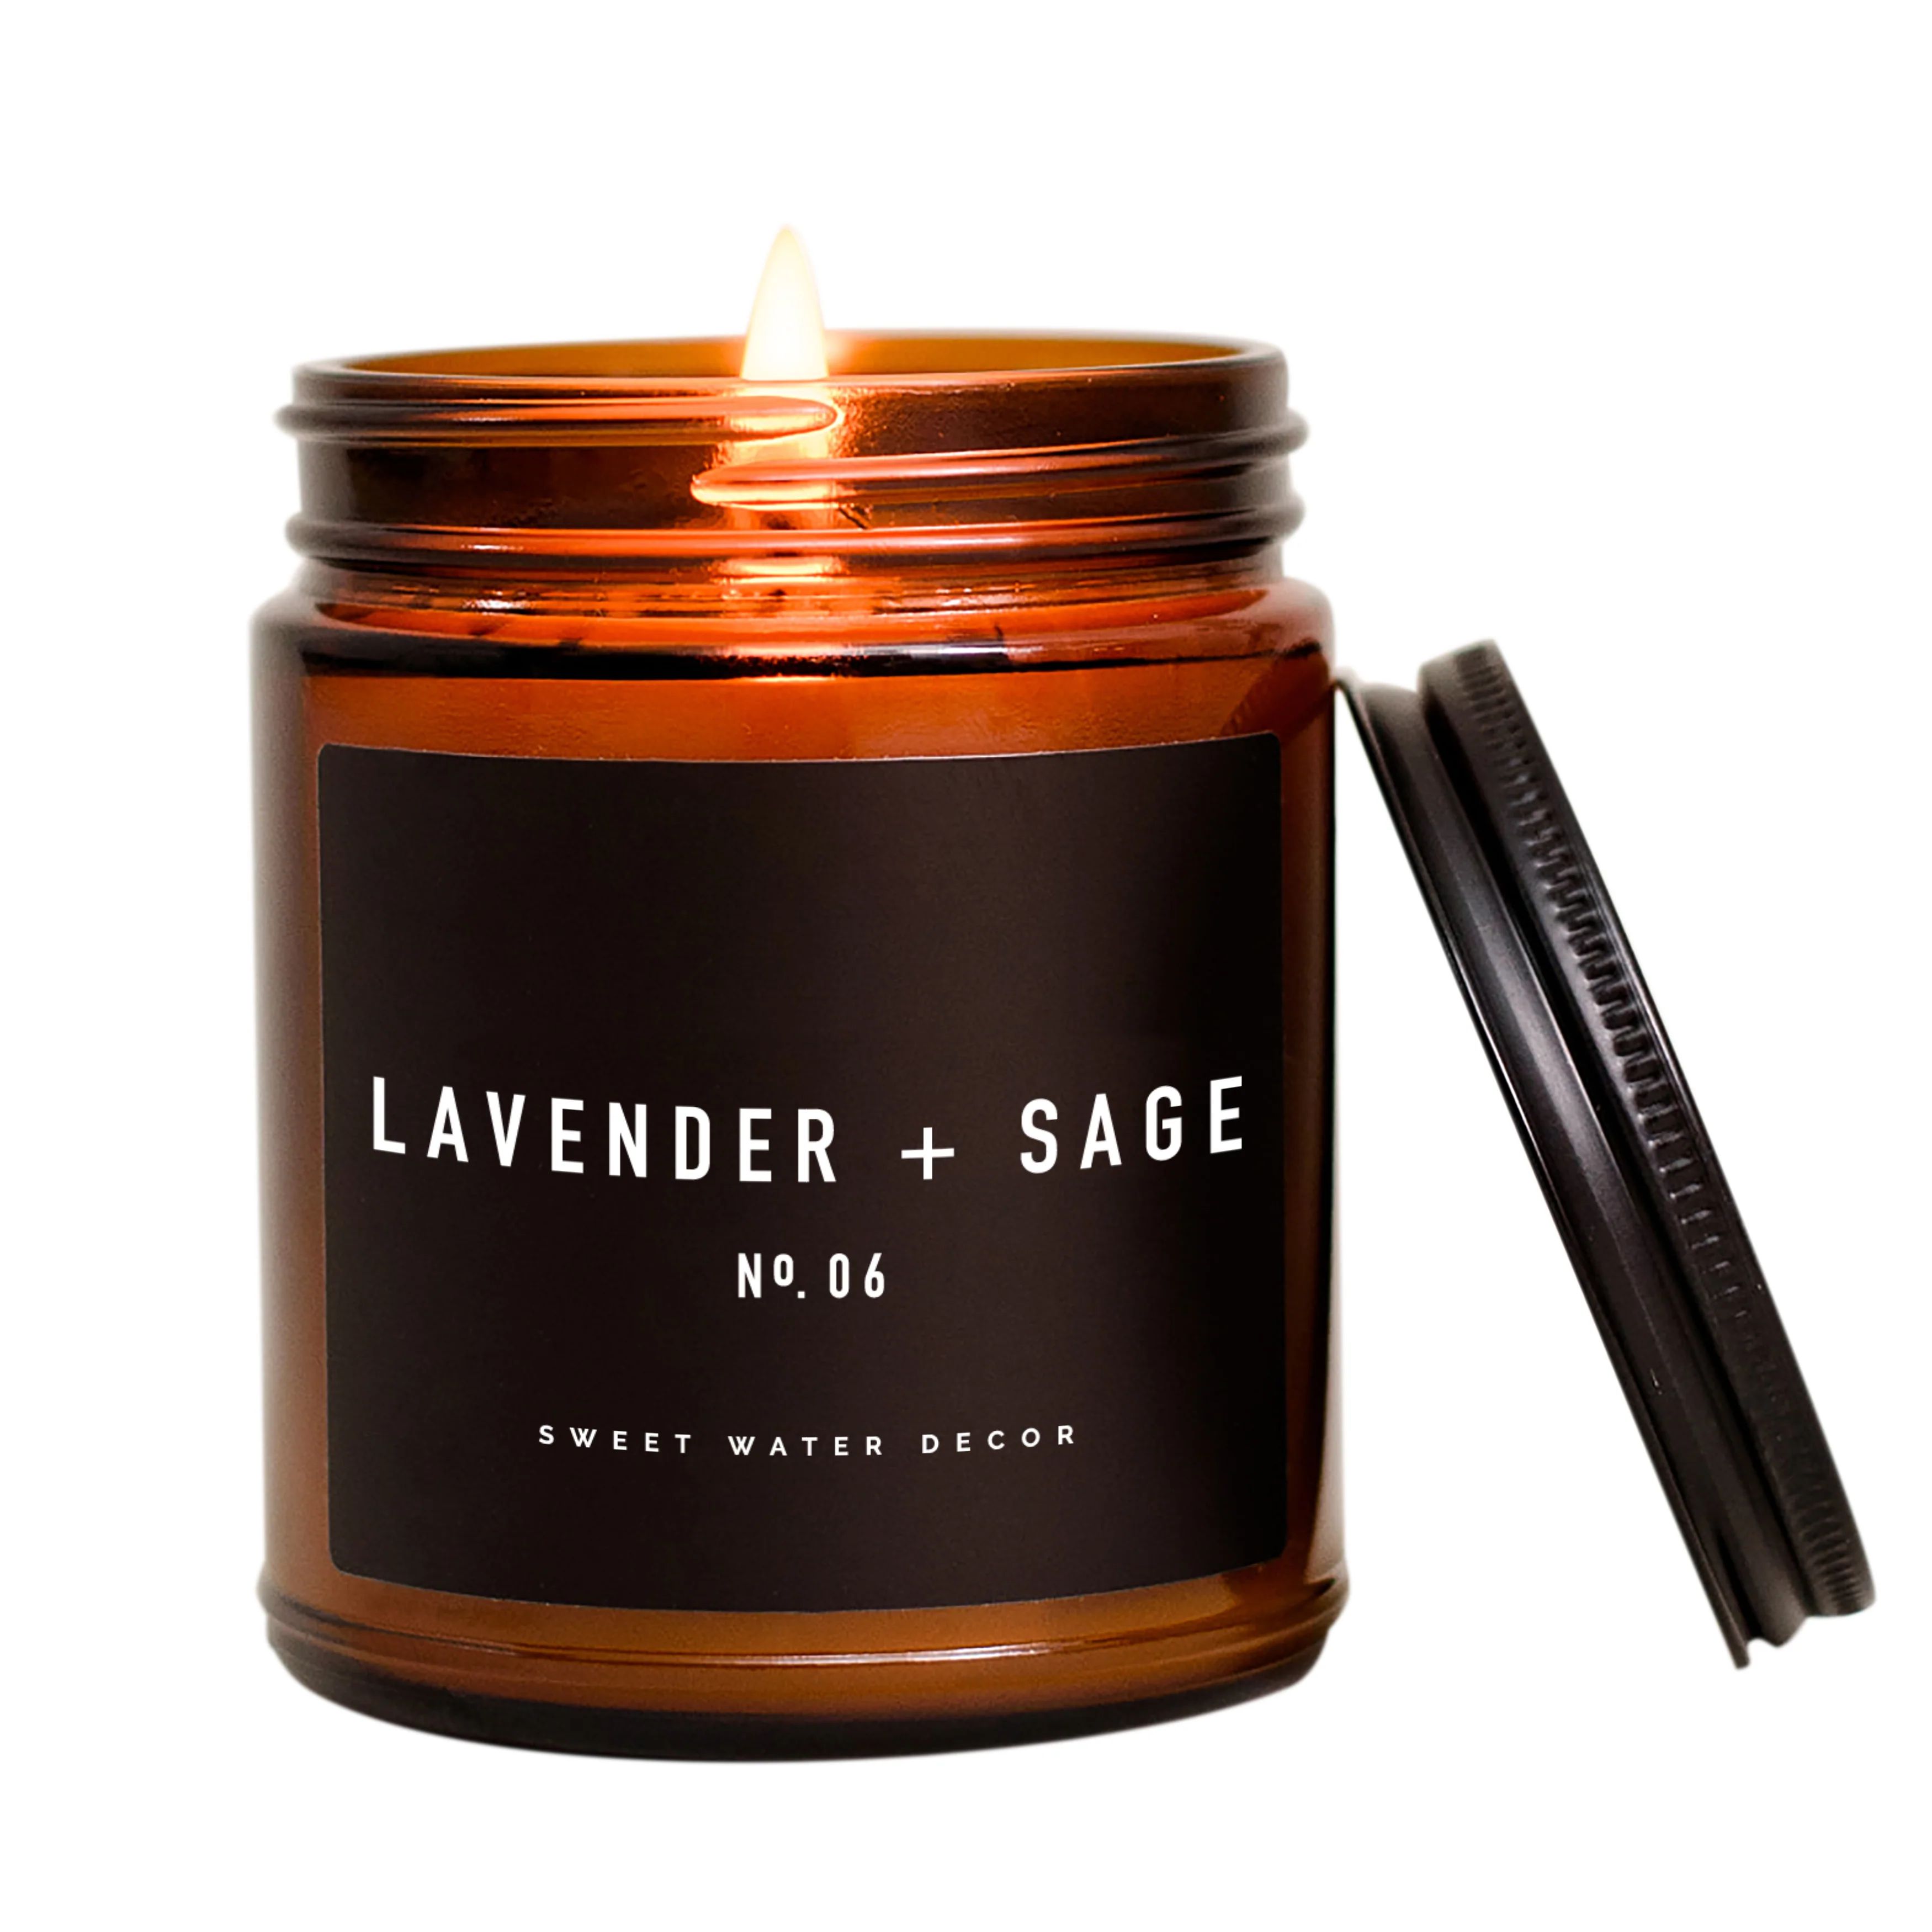 Lavender and Sage Soy Candle - Amber Jar - 9 oz | Sweet Water Decor, LLC